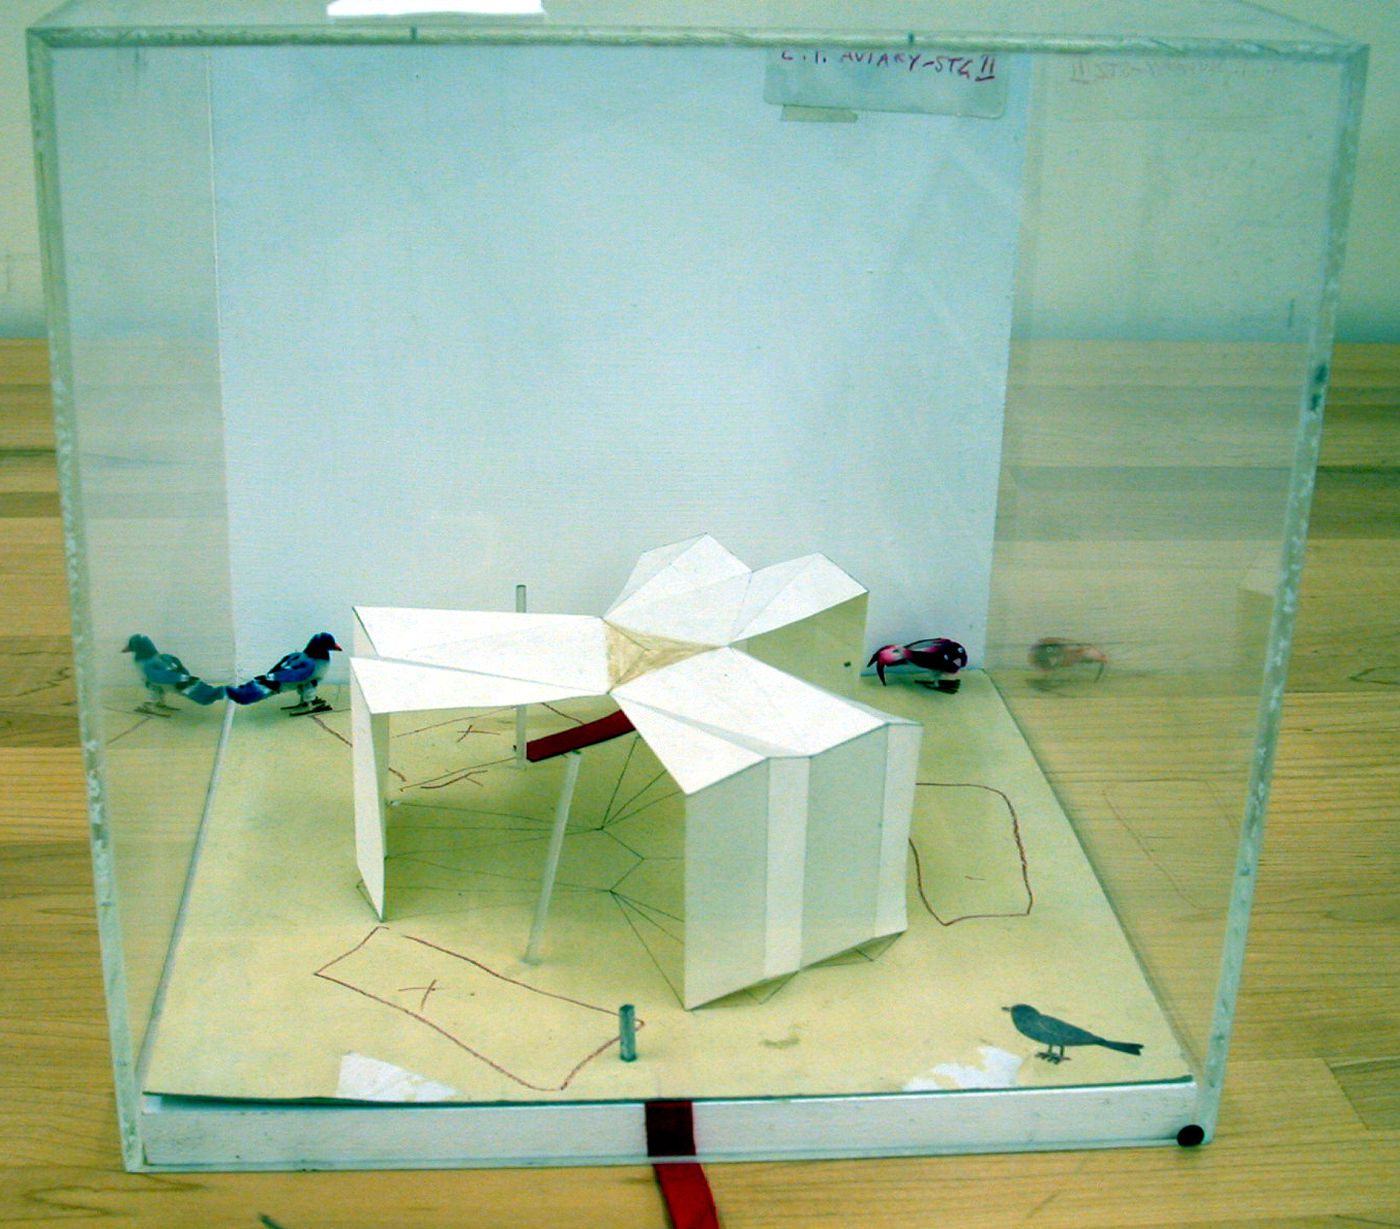 Model of aviary in "Stage 2" configuration for rural site